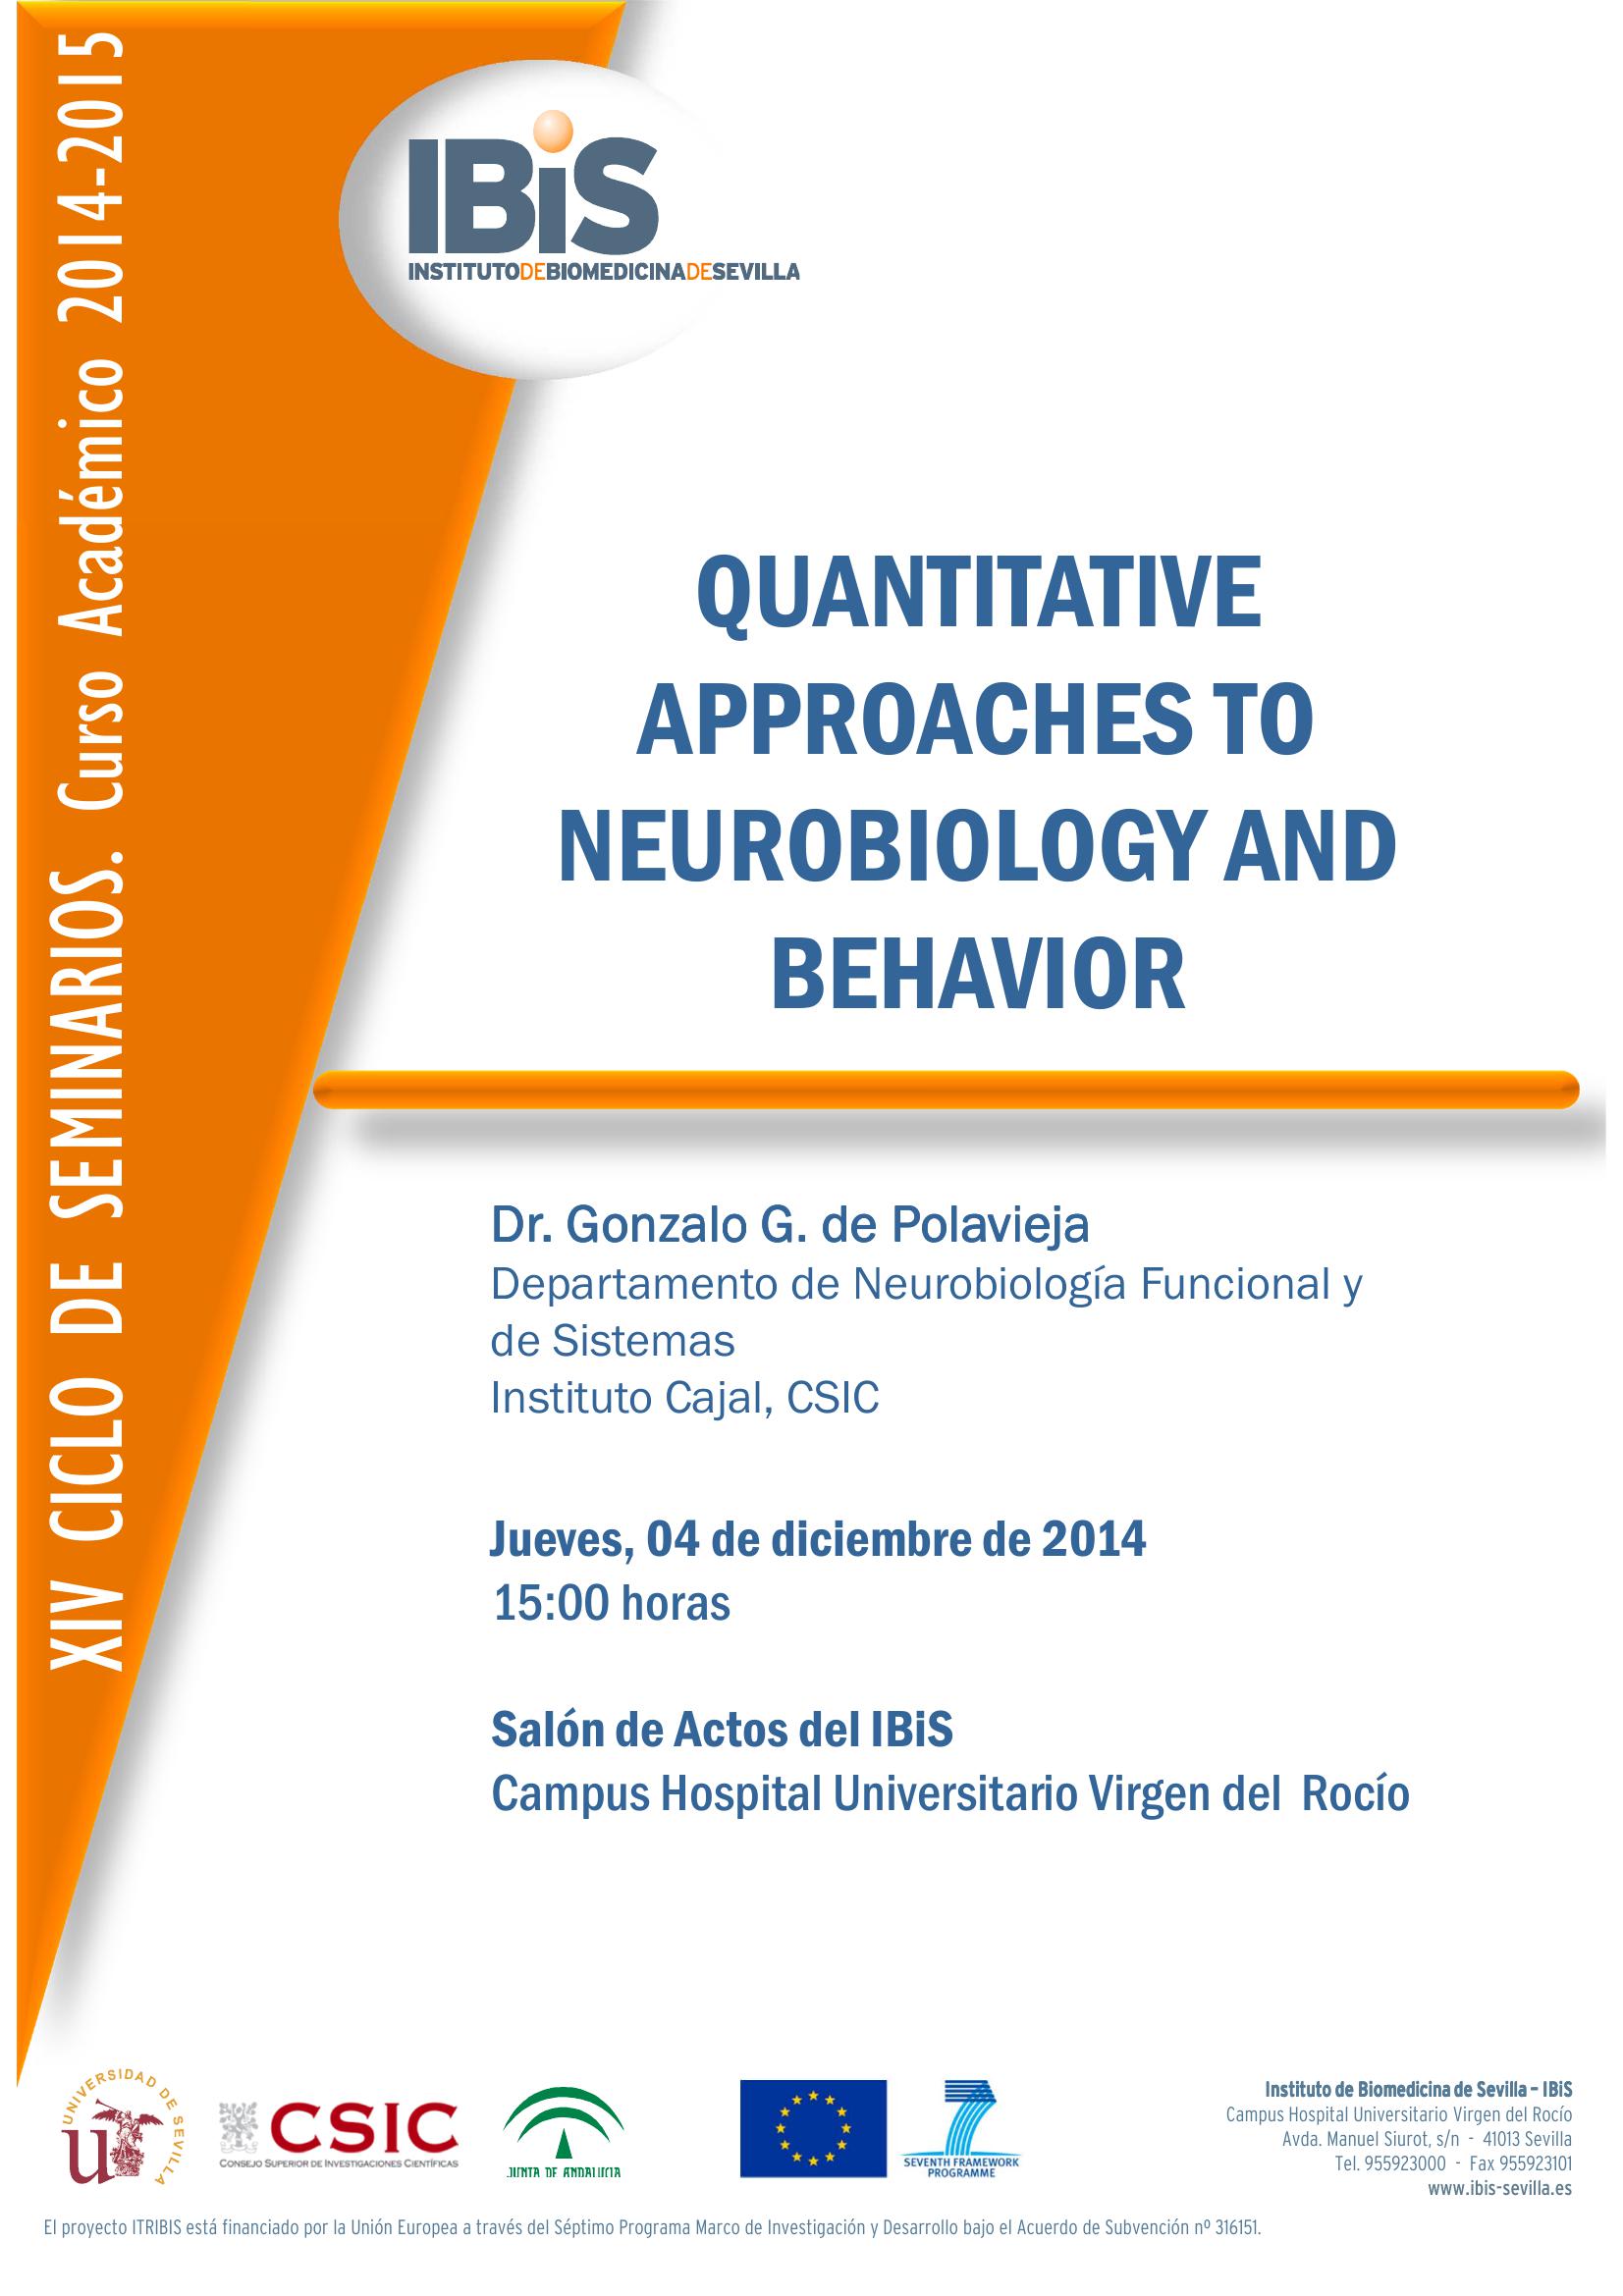 Poster: QUANTITATIVE APPROACHES TO NEUROBIOLOGY AND BEHAVIOR